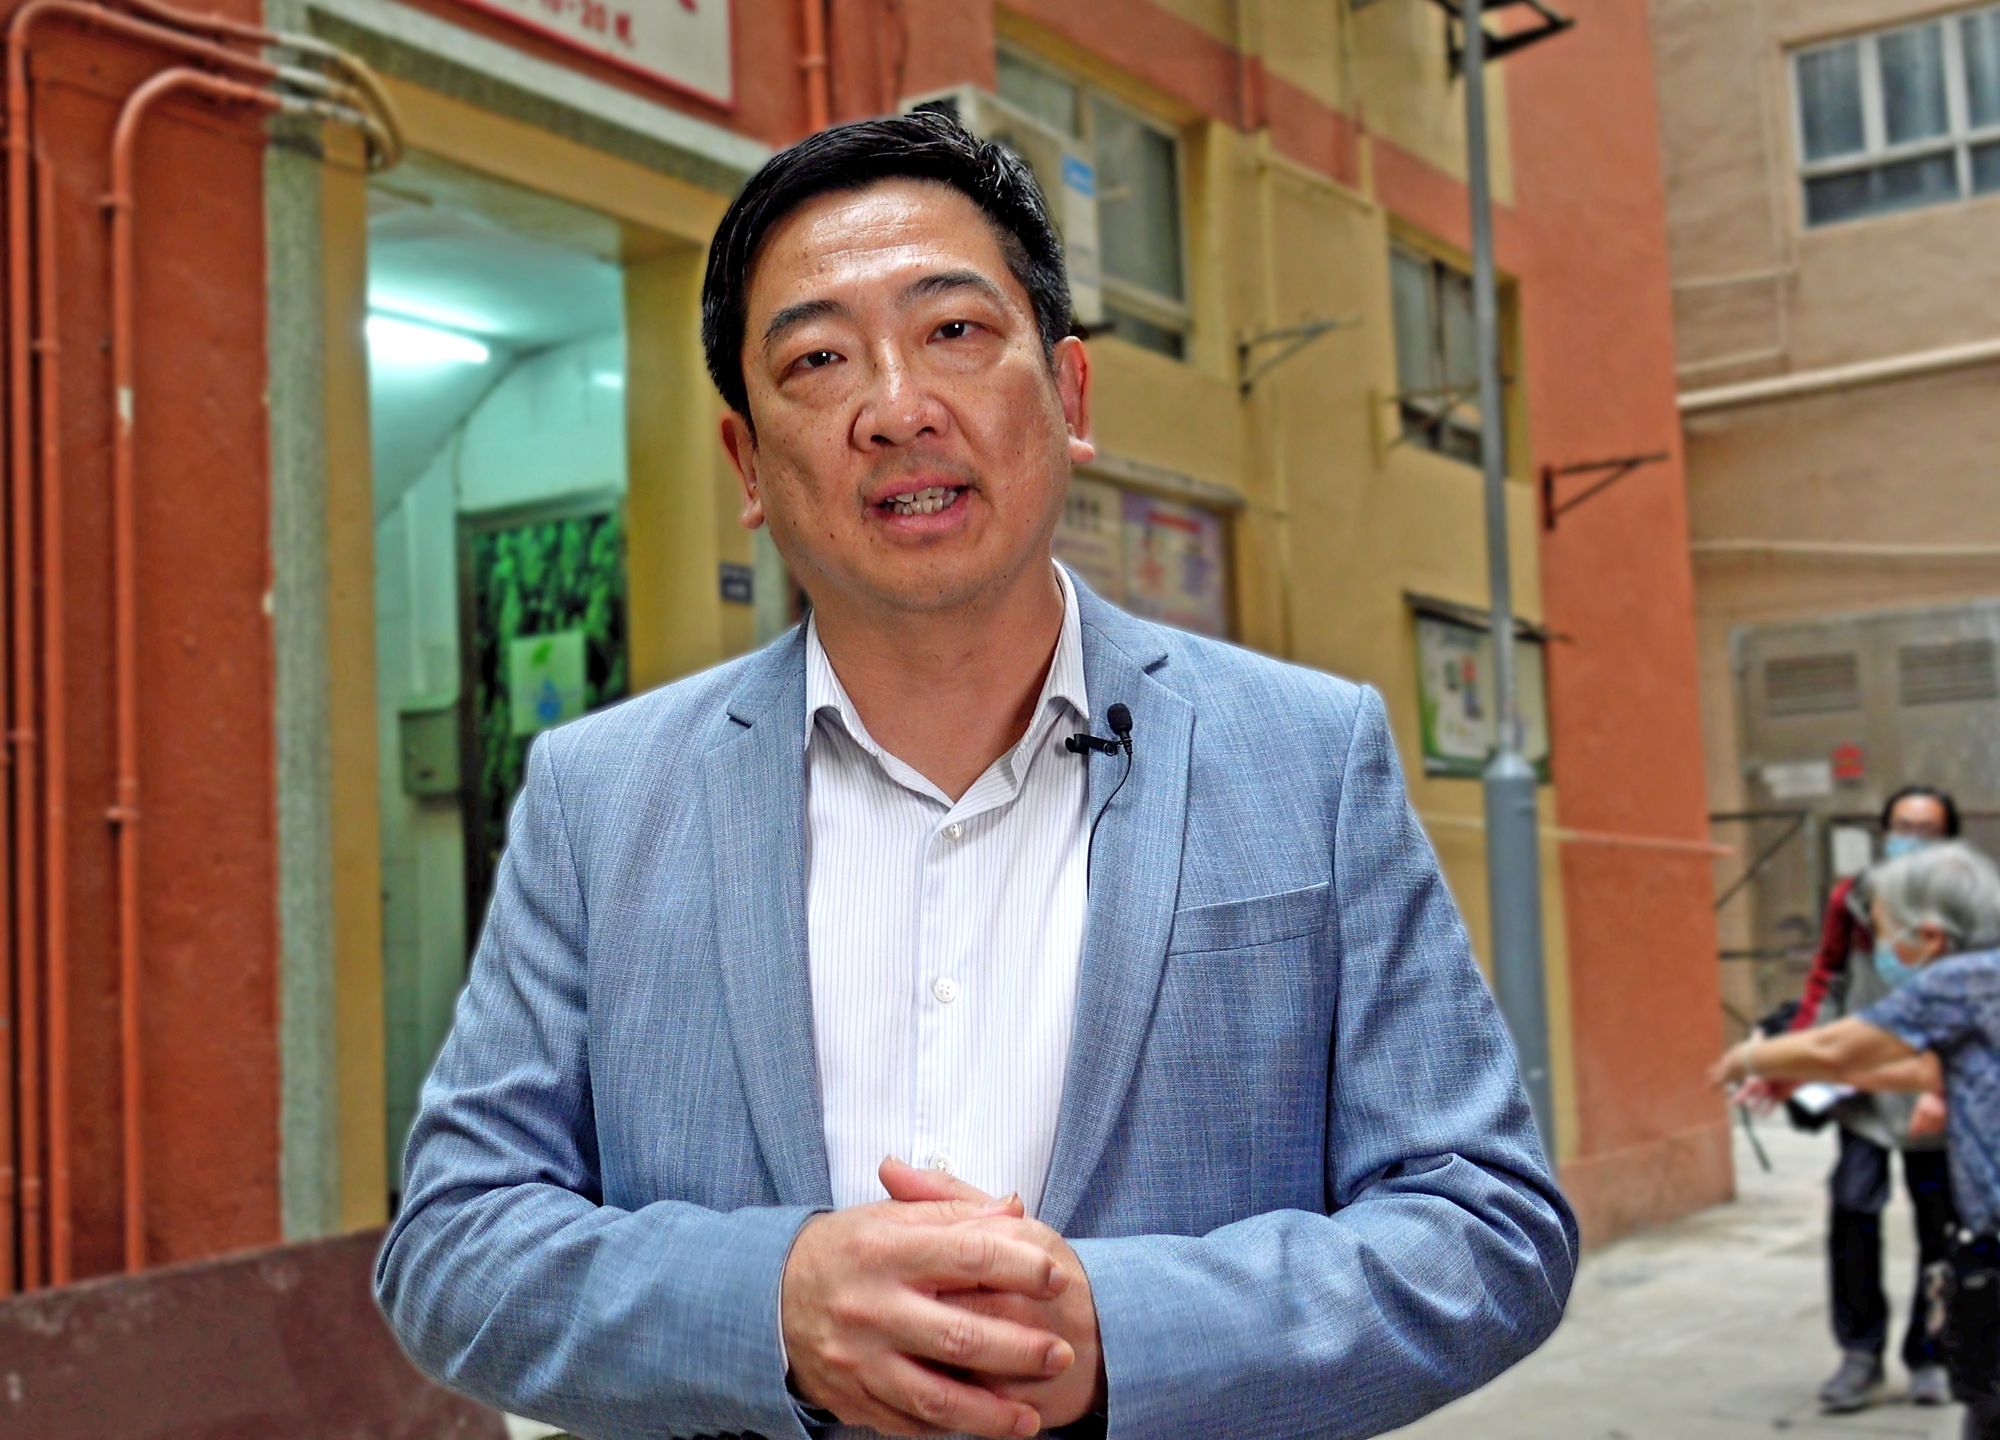 General Manager (Building Rehabilitation) of the Urban Renewal Authority (URA), Mr WONG Se-king, Peter, says that many owners have encountered difficulties arising from the “three shortfalls”, viz. lack of organisational capabilities, insufficient knowledge of building rehabilitation and lack of financial reserves, in arranging building rehabilitation works.